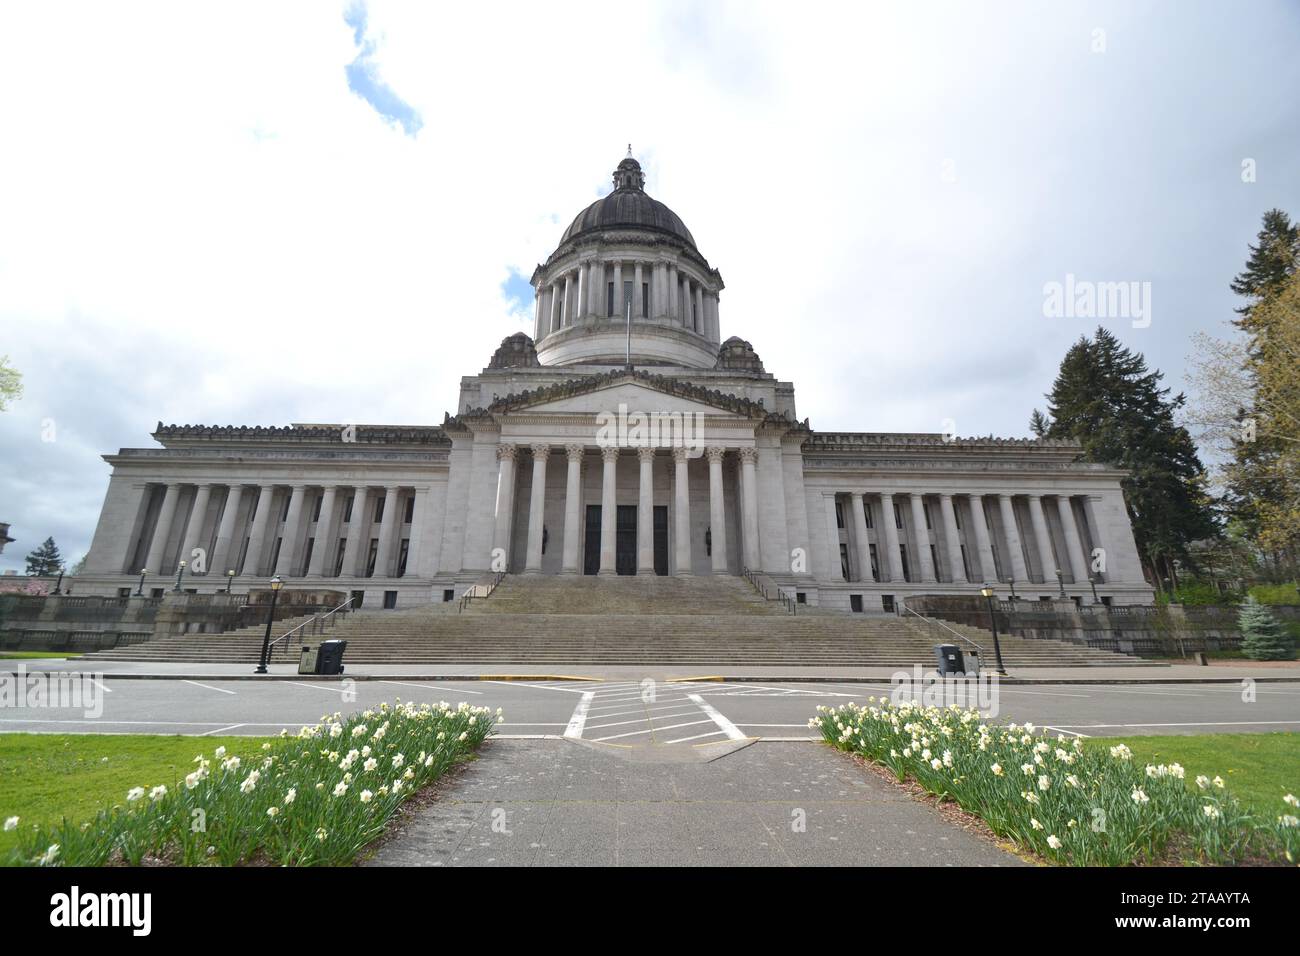 The Capital building in Olympia Washing USA Stock Photo